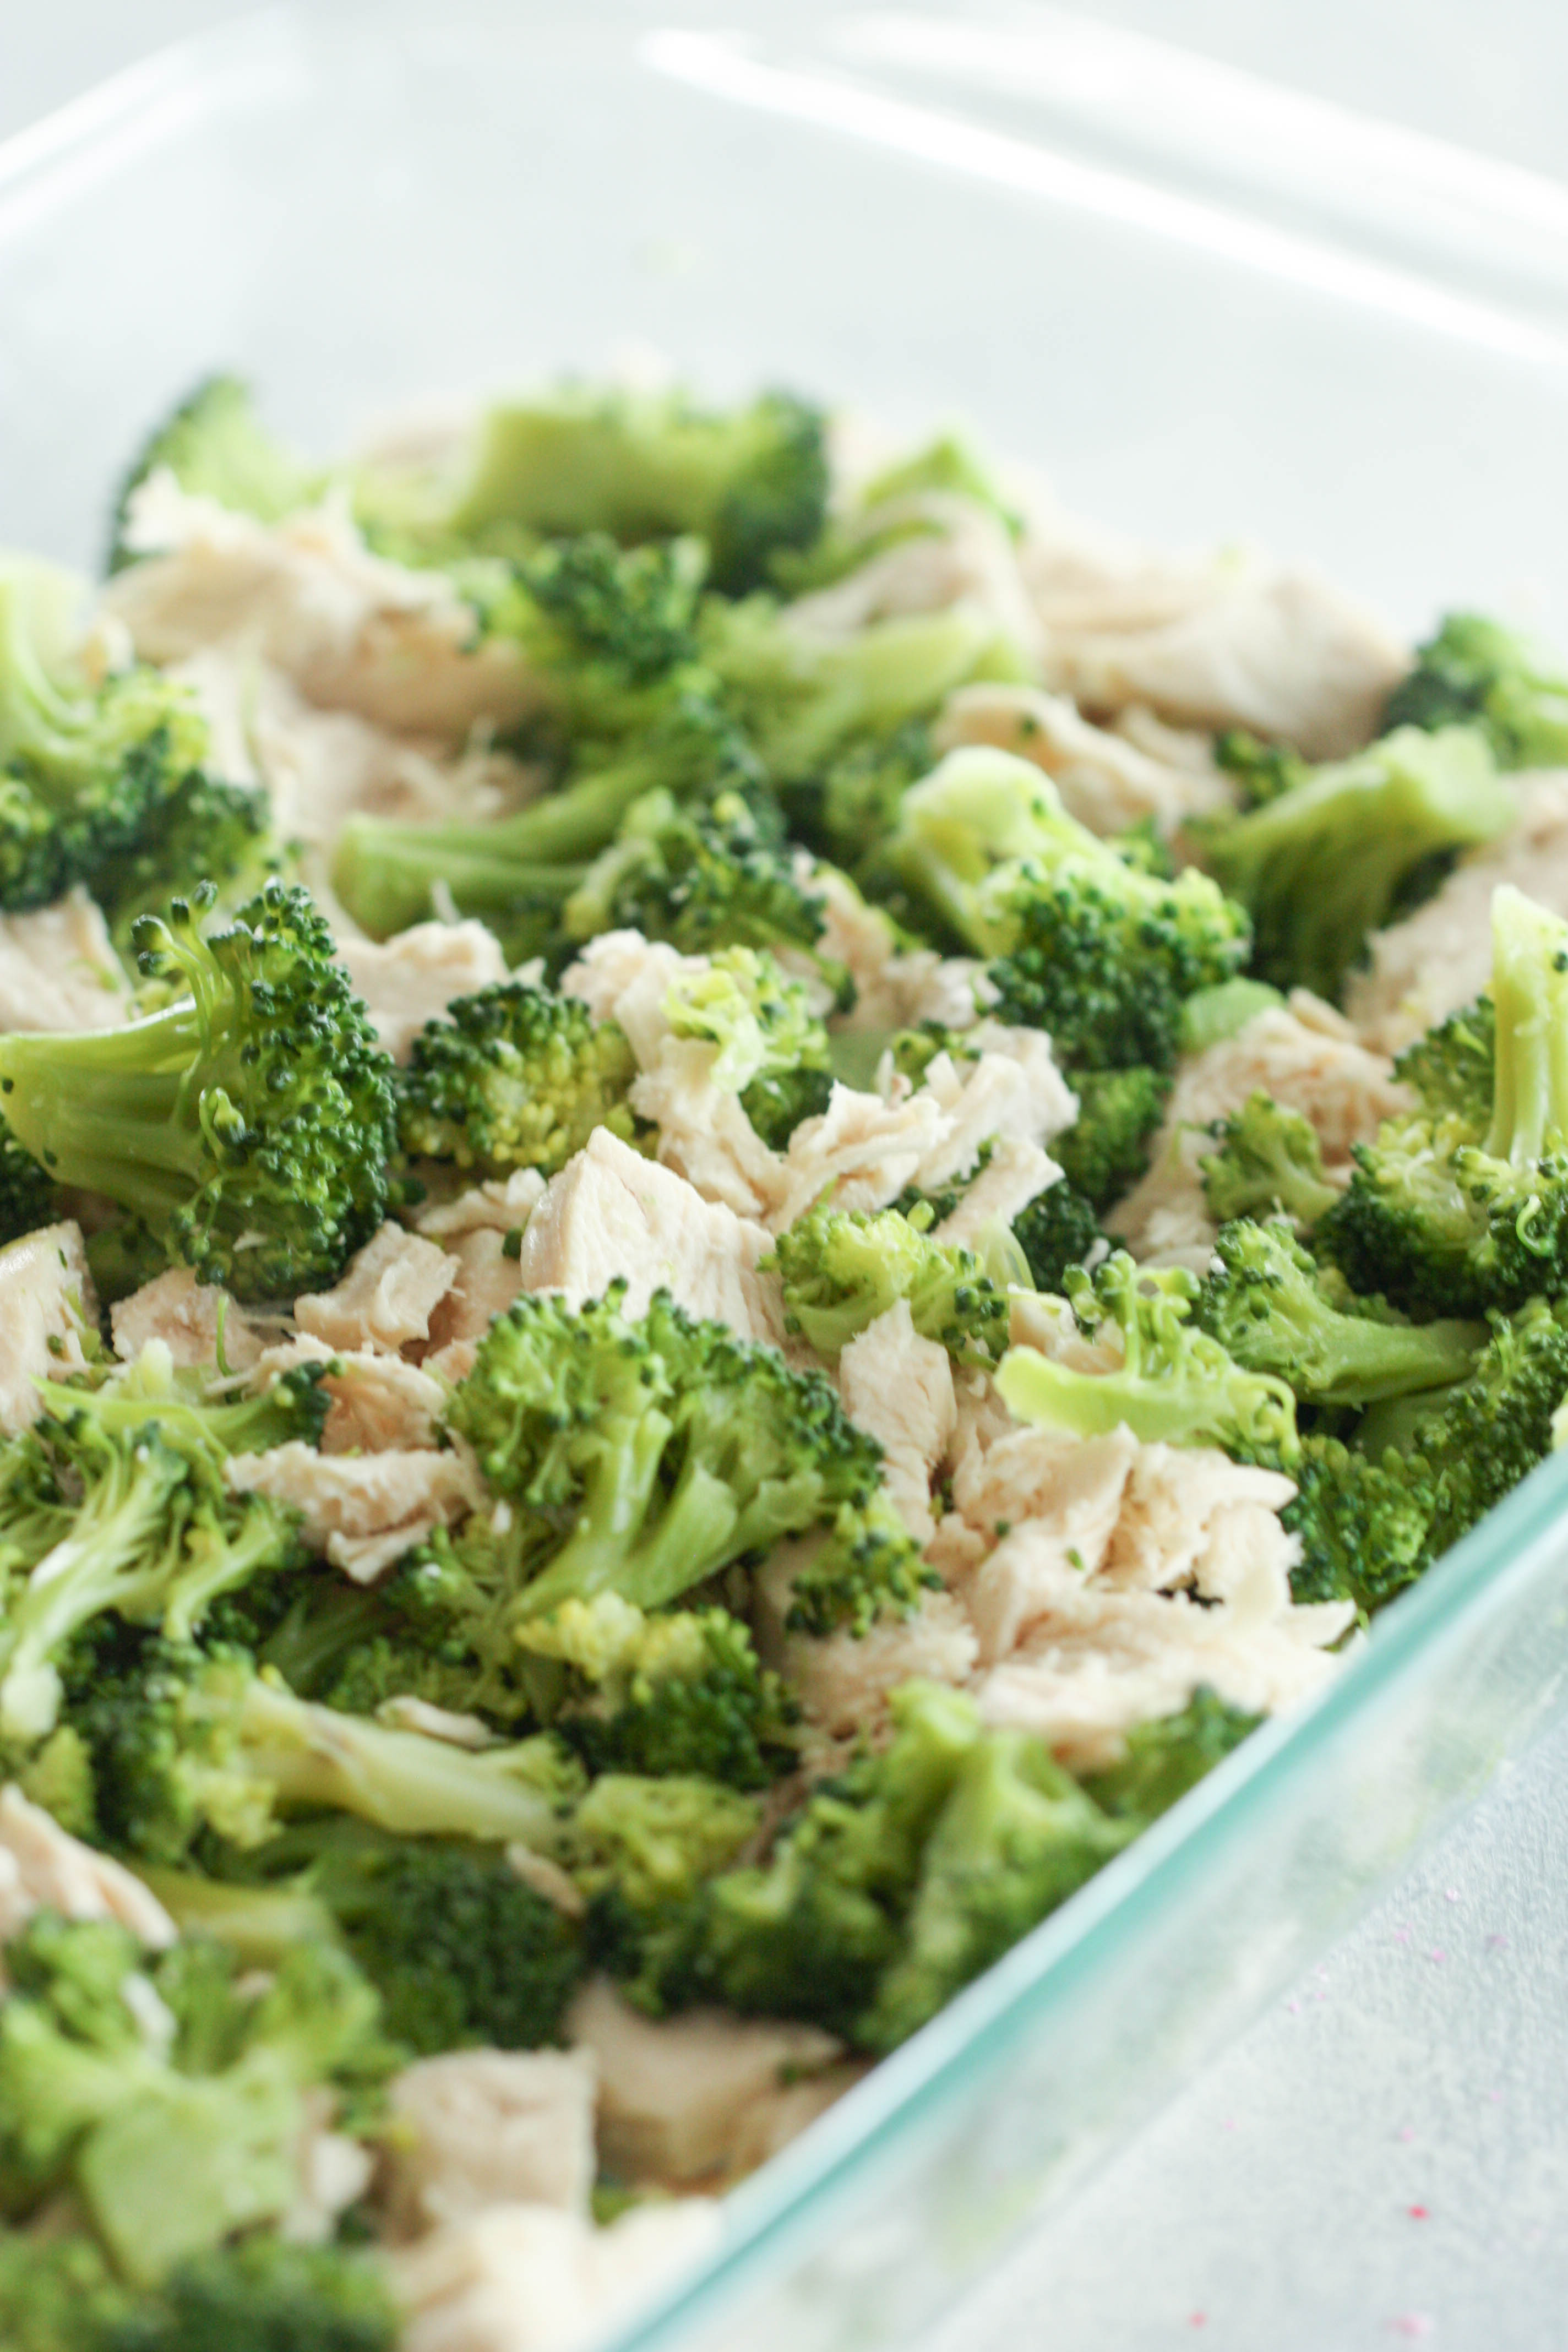 Chicken and broccoli tossed together in casserole dish